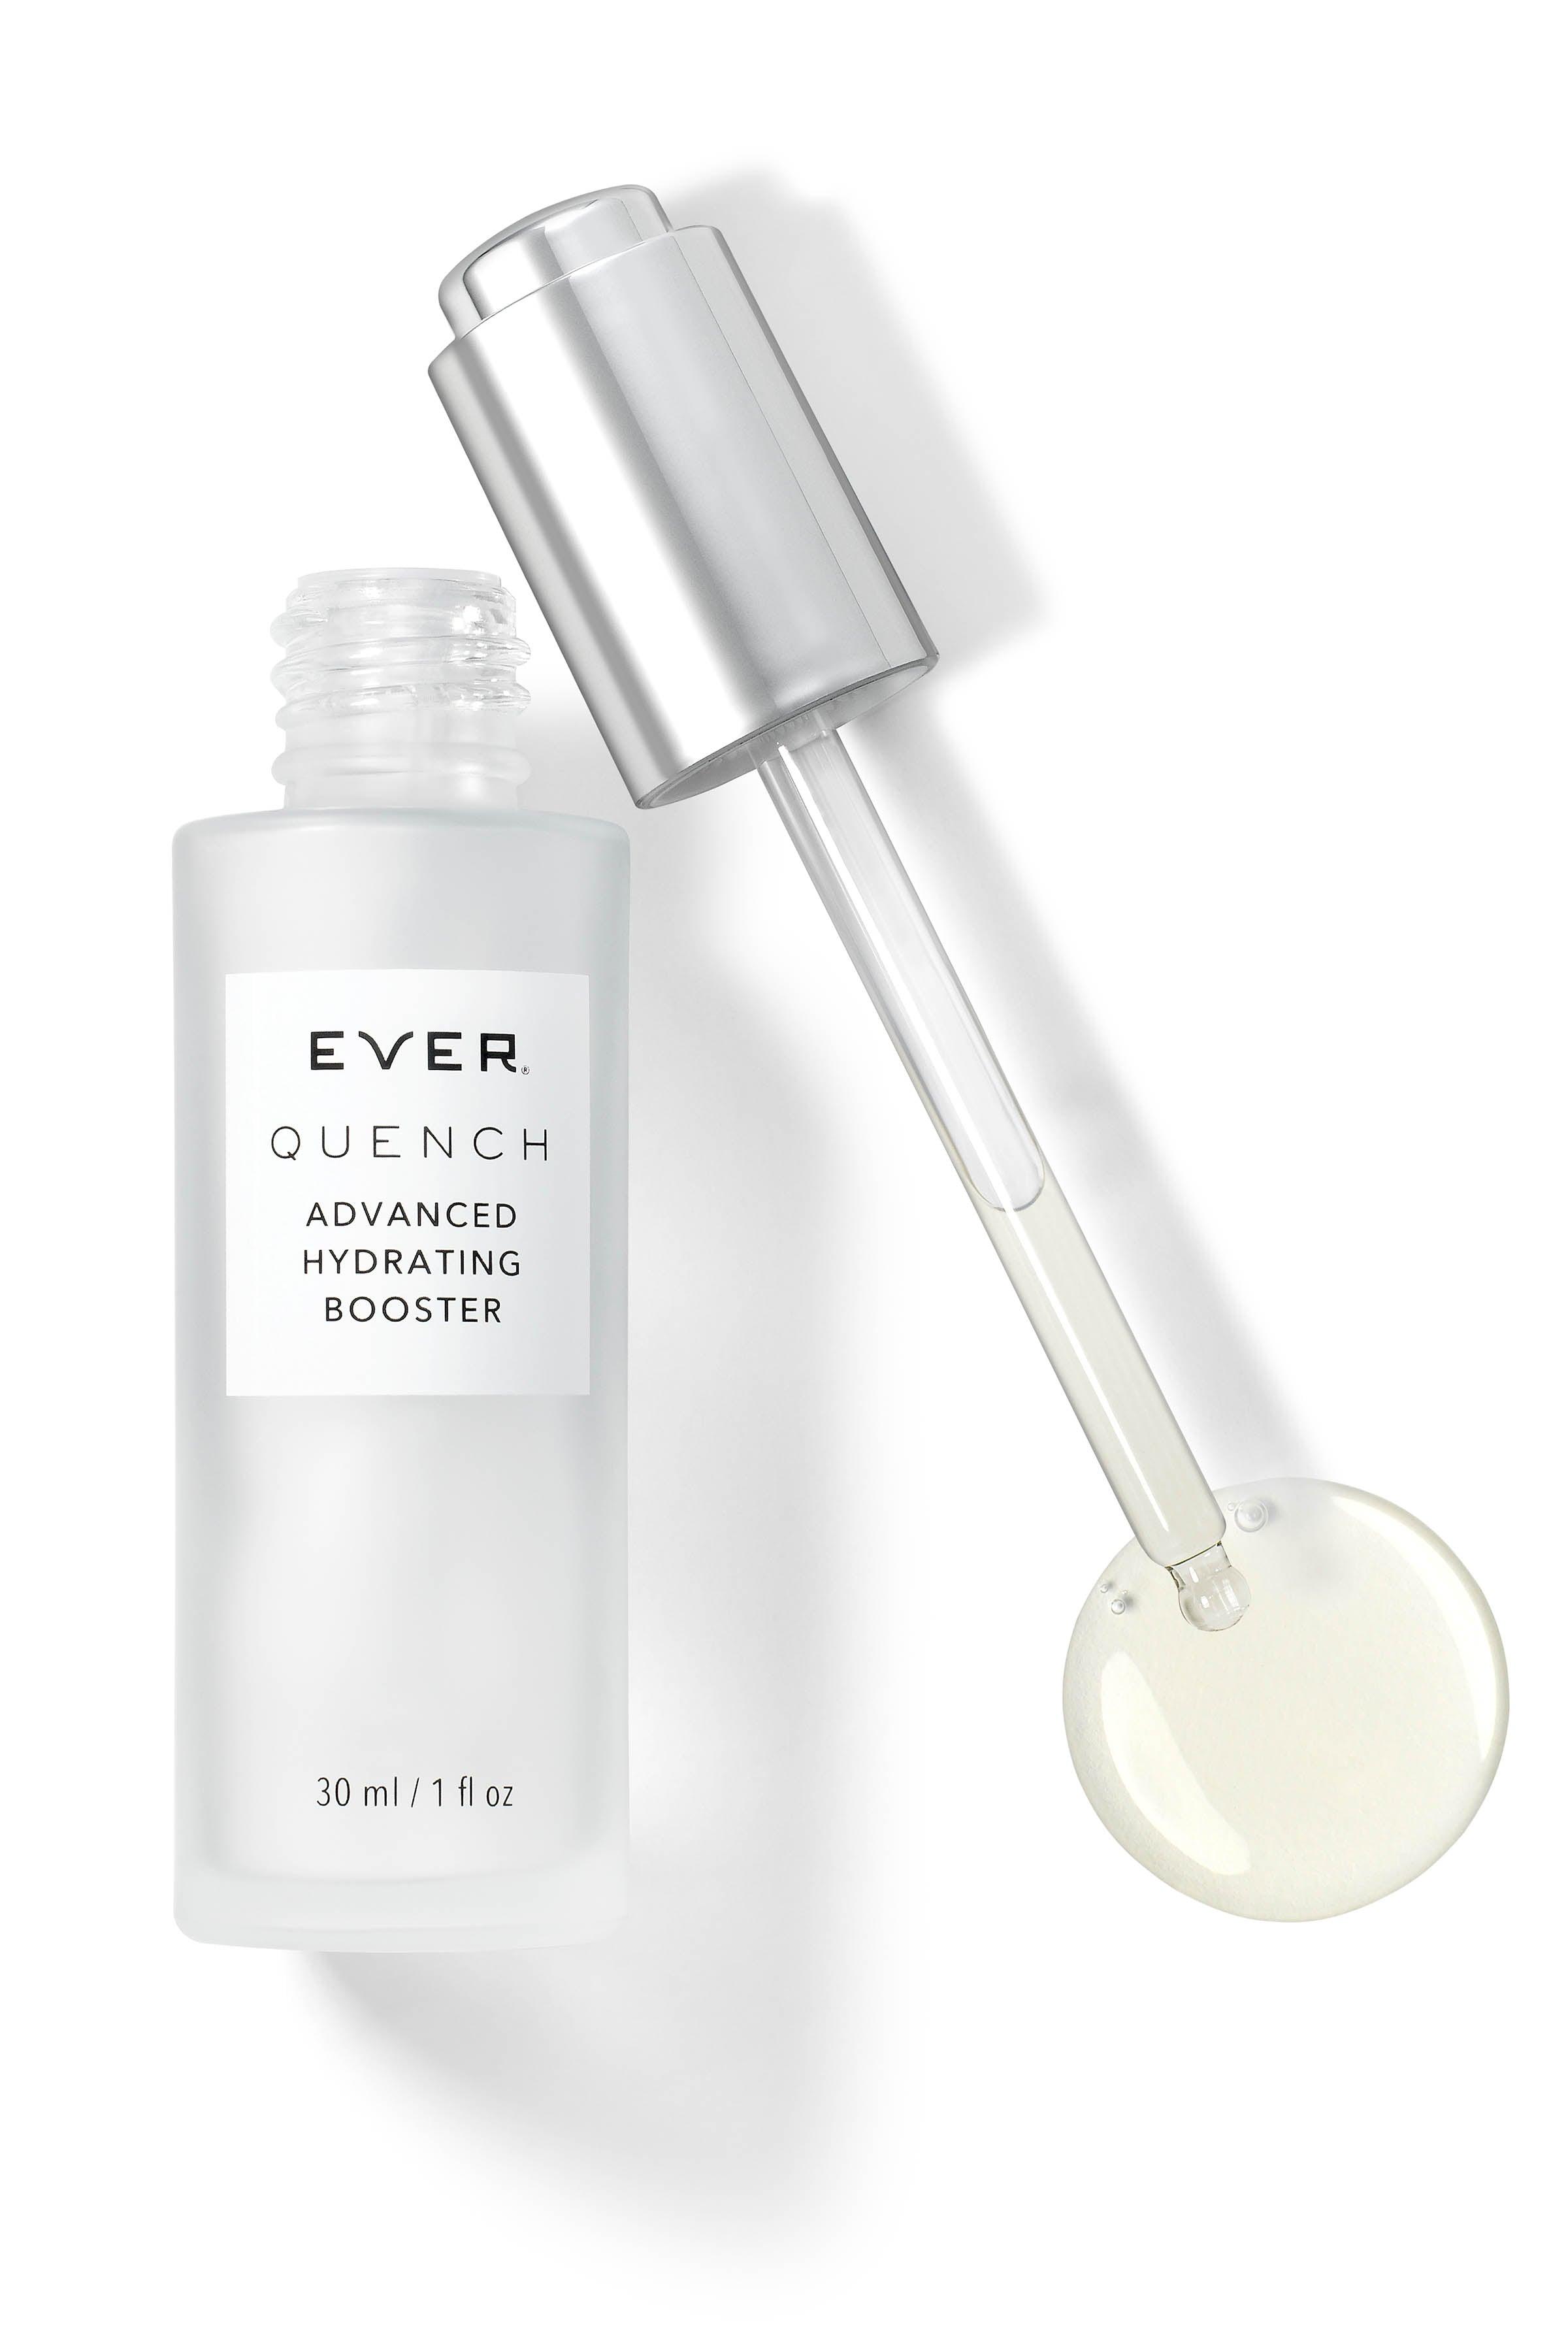 QUENCH Advanced Hydrating Booster - EVER